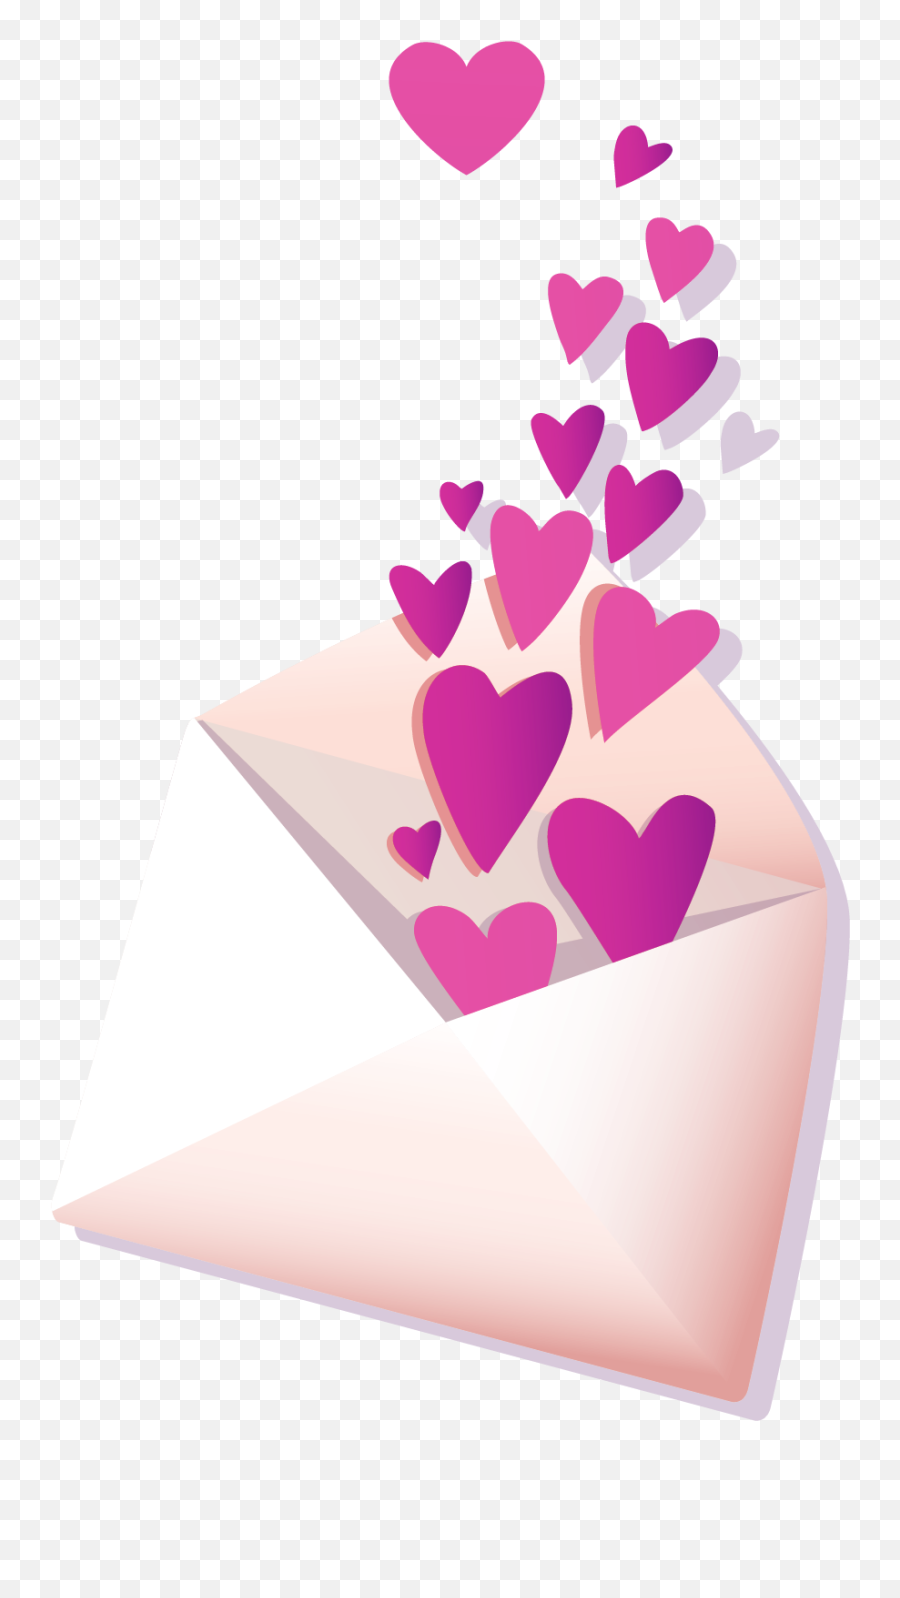 Send A Love Letter To Someone Love Letter Loveletter - Rude Tongue Comes With A Kind Heart Emoji,Love Letter Emoji